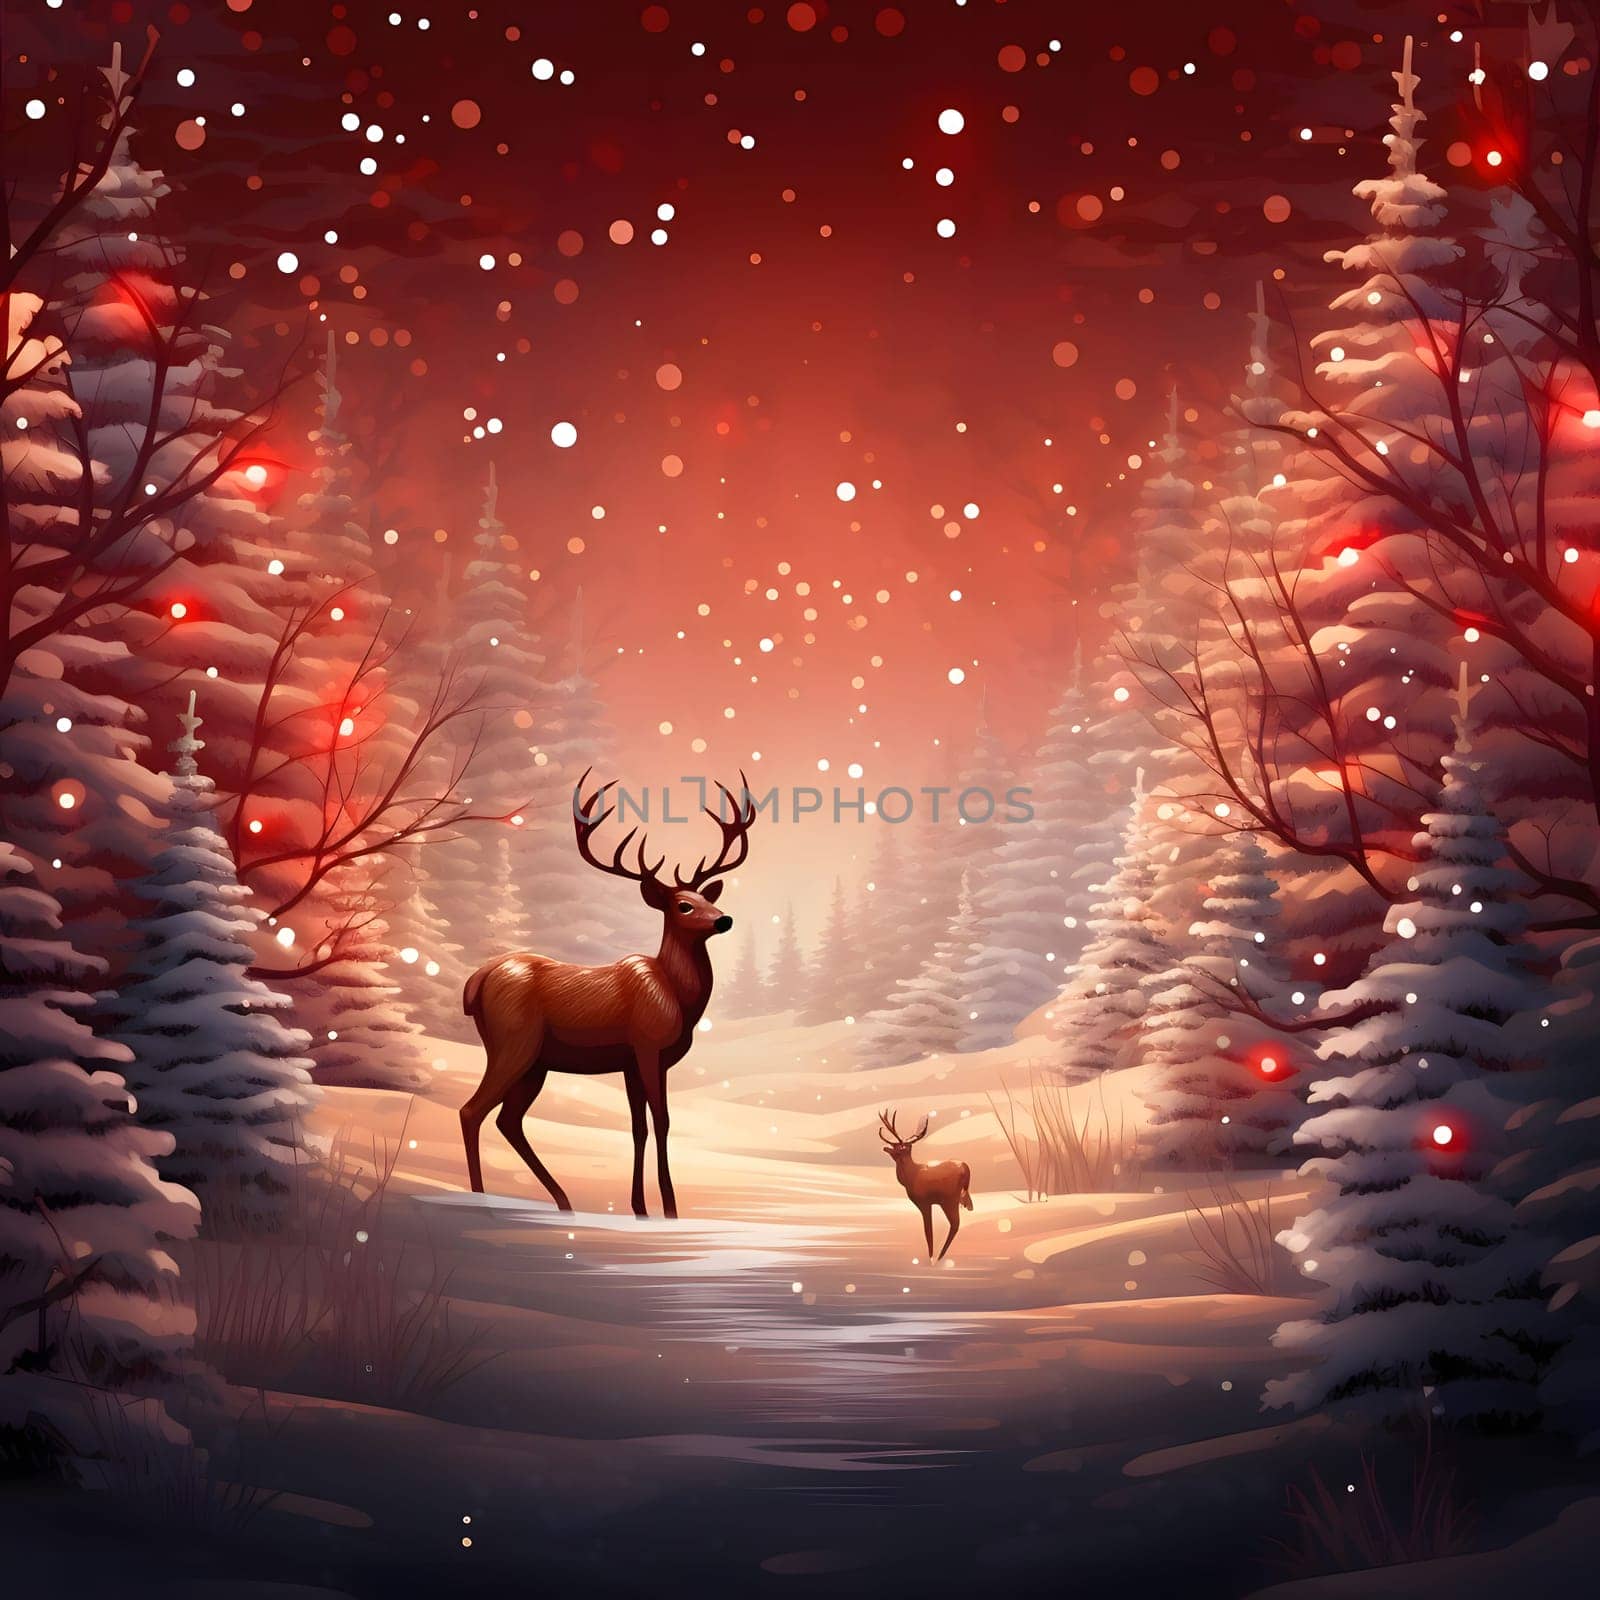 A lone deer in a snow-covered forest at night, illustration. Xmas tree as a symbol of Christmas of the birth of the Savior. by ThemesS